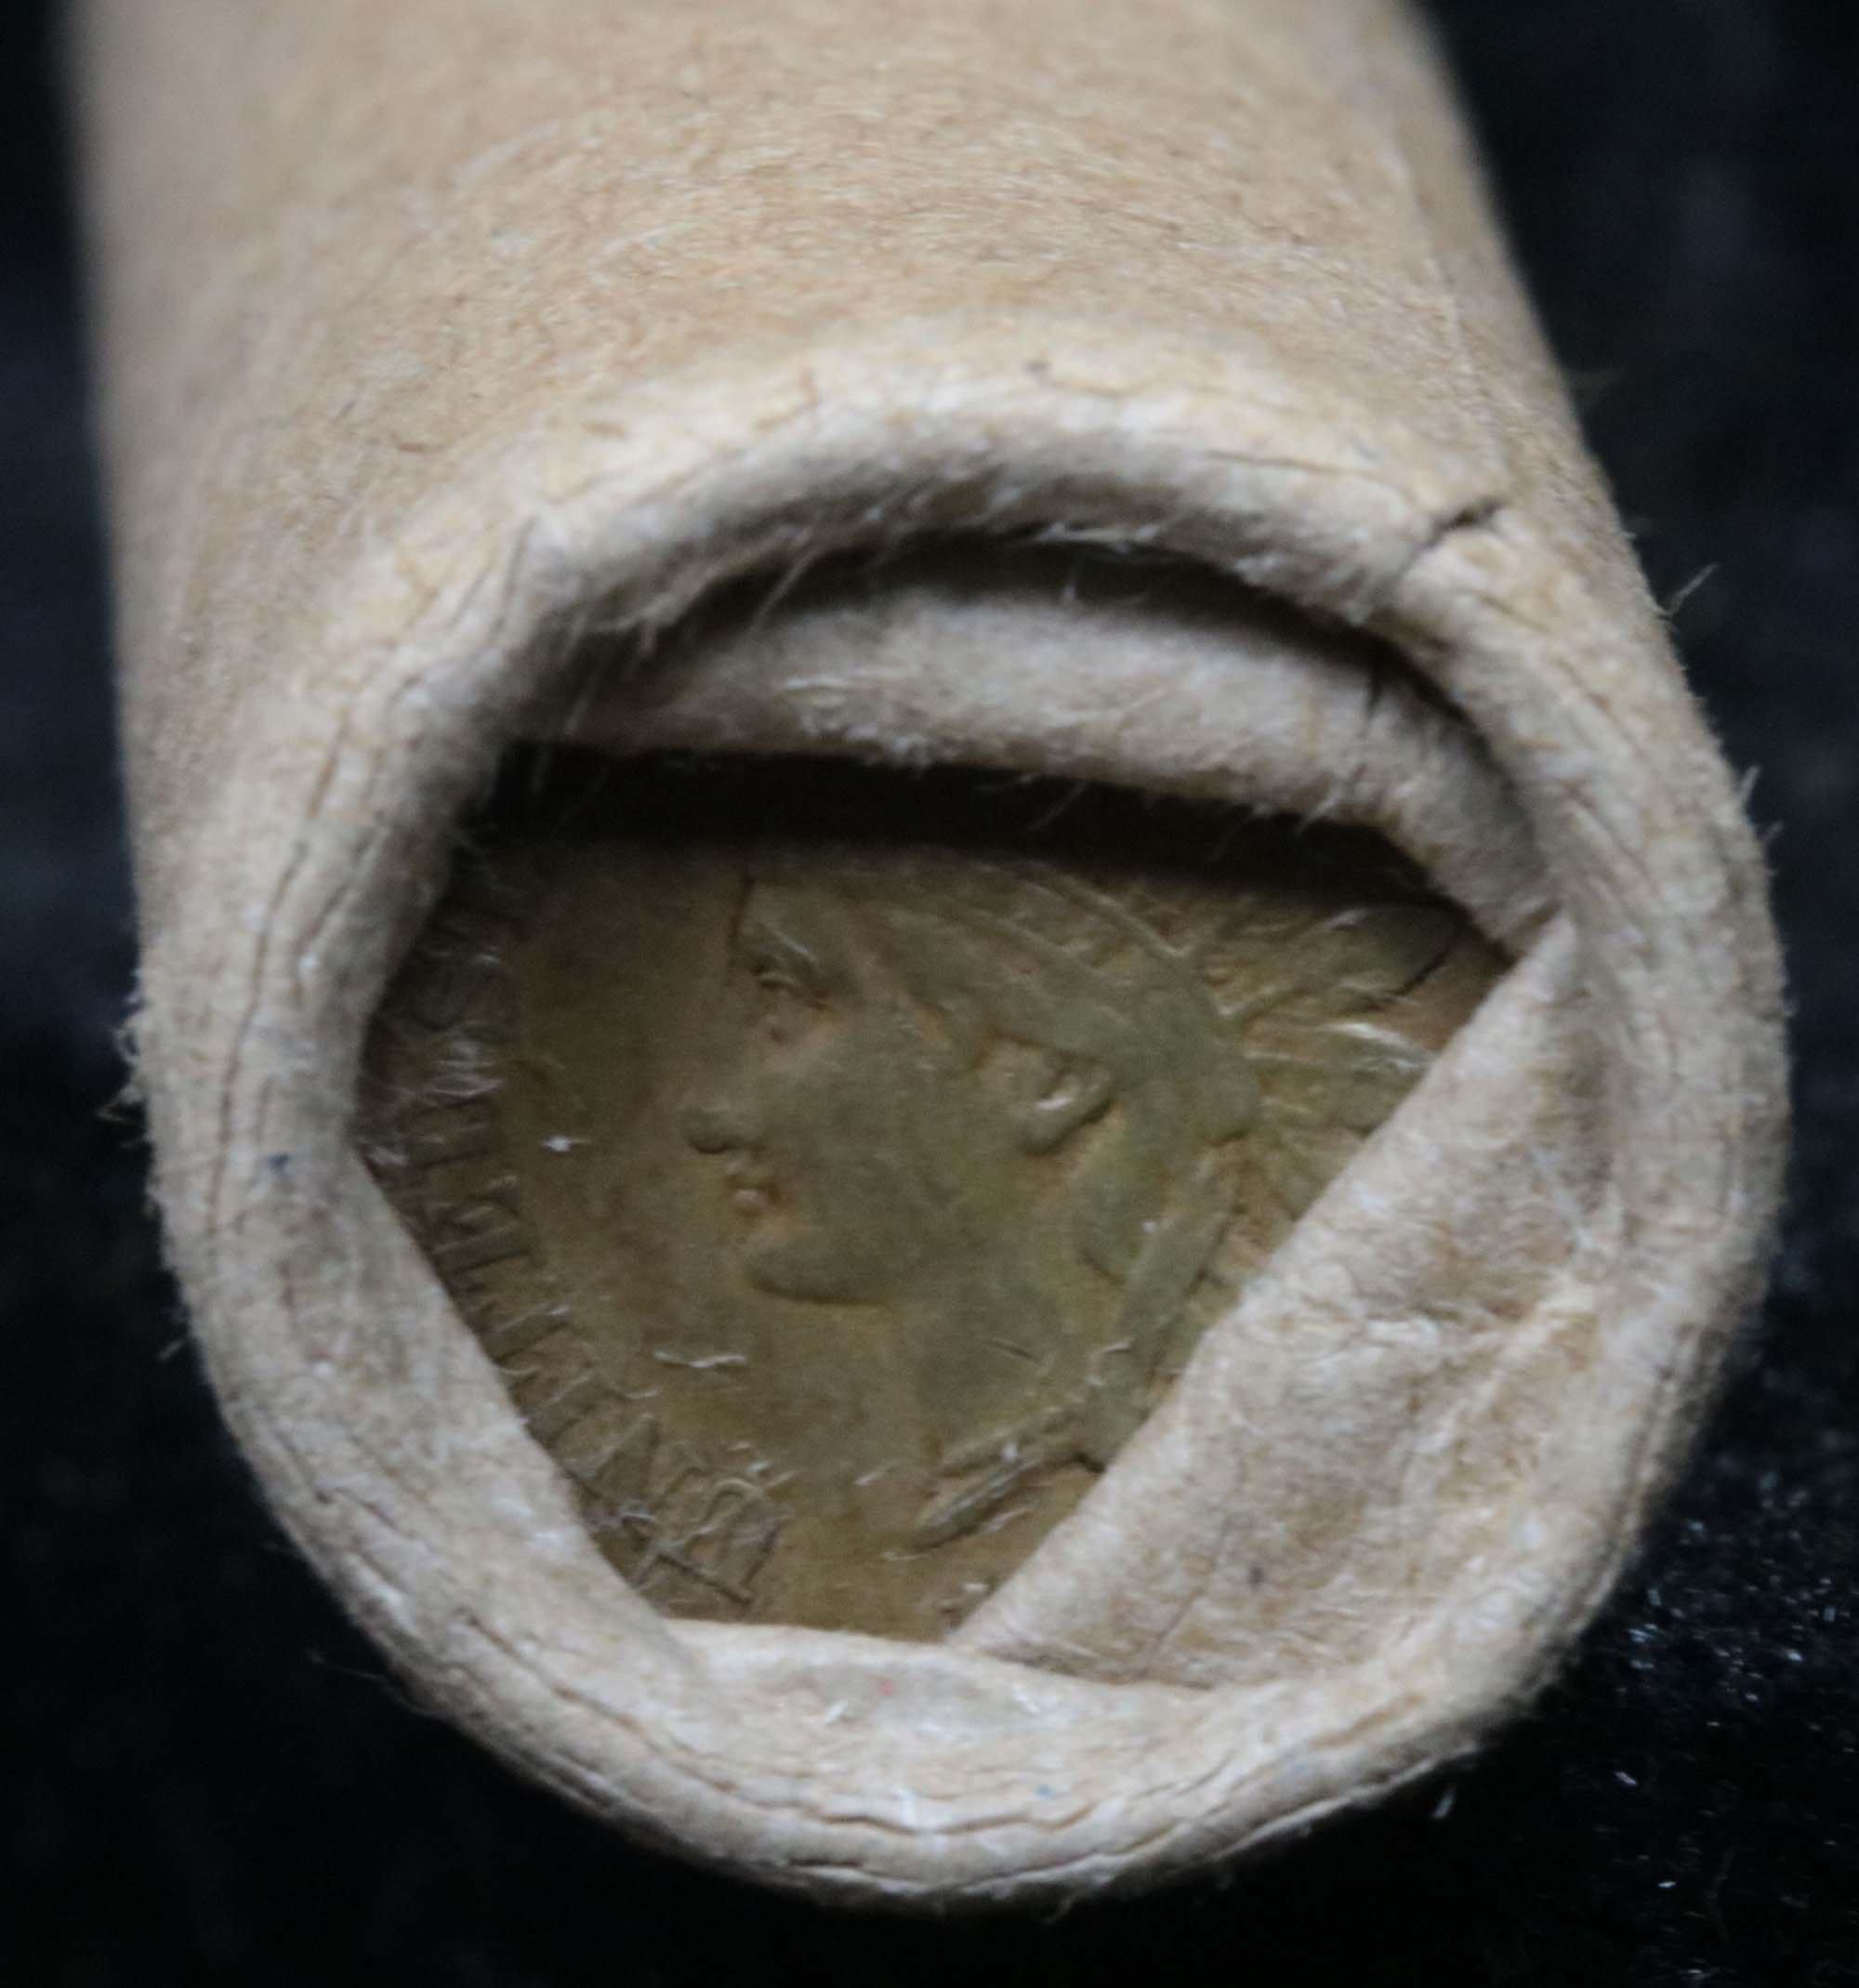 ***Auction Highlight*** 1859 solid date roll Indian Cent 1c circulated (fc)